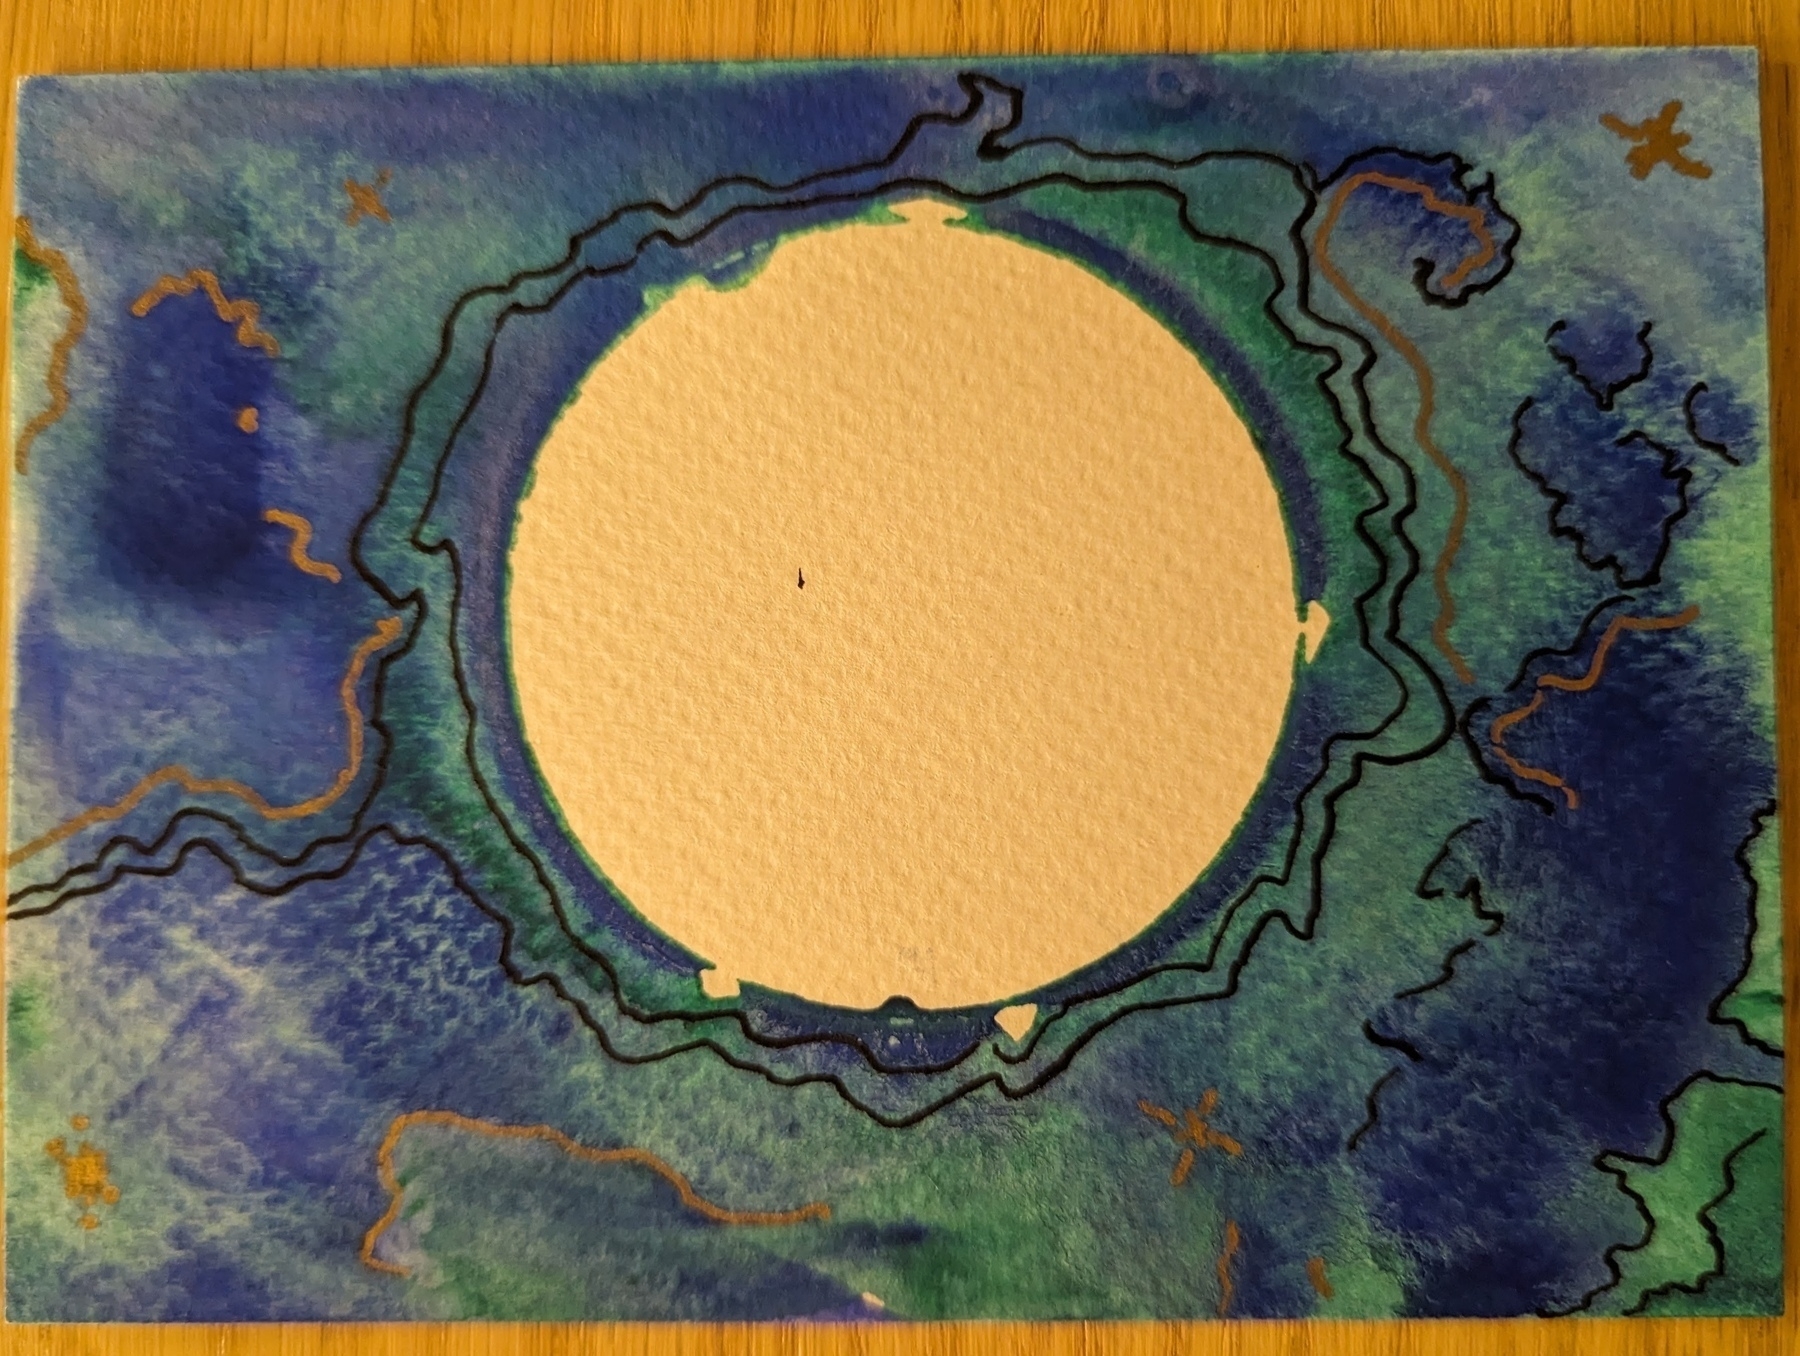 A hand-painted card depicting a planet or moon against a swirling blue-green background.